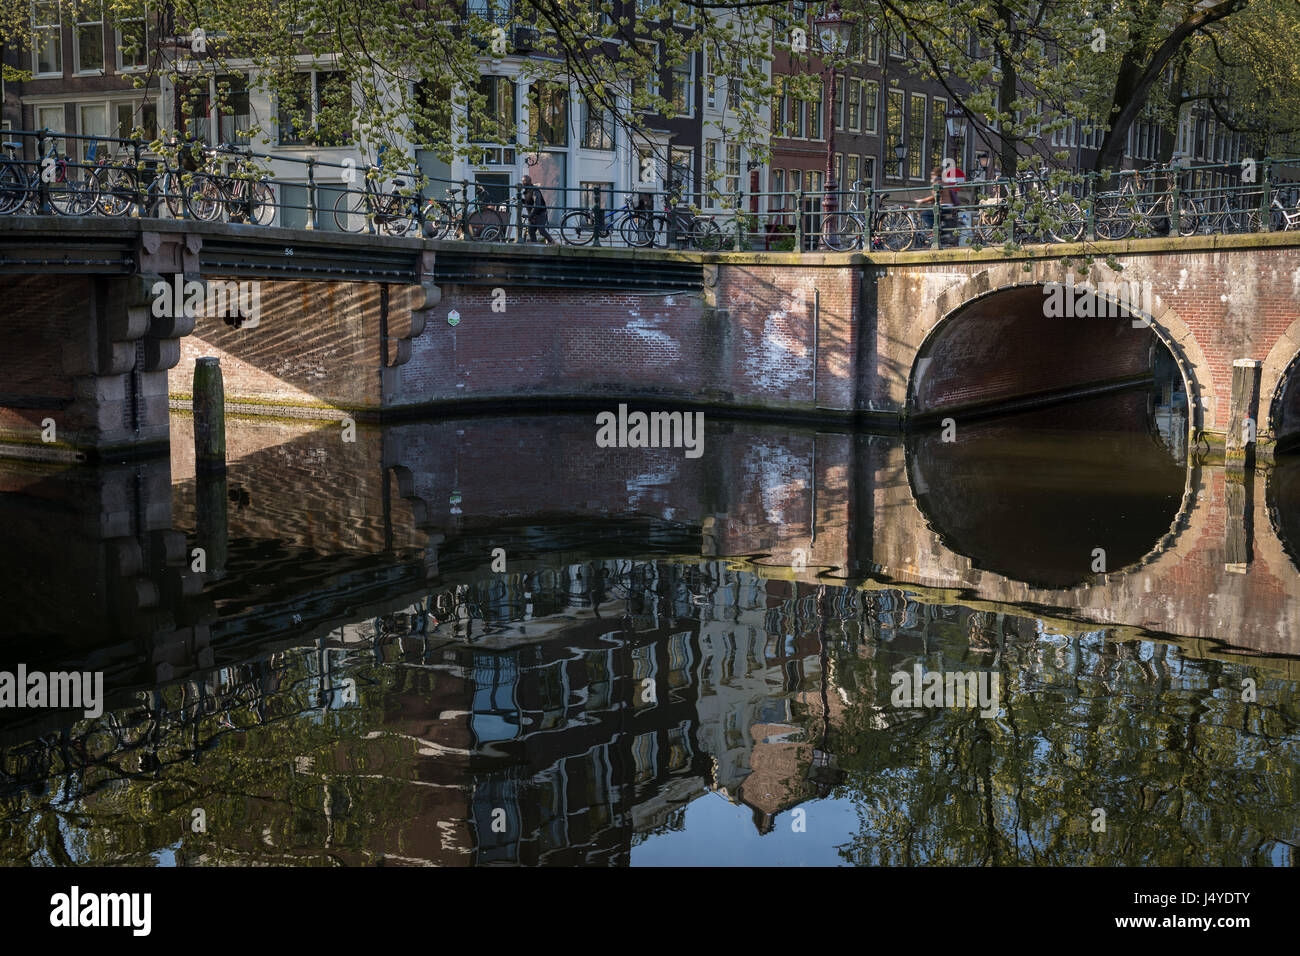 Bridges and bicyles on the Brouwersgracht canal, Amsterdam Stock Photo